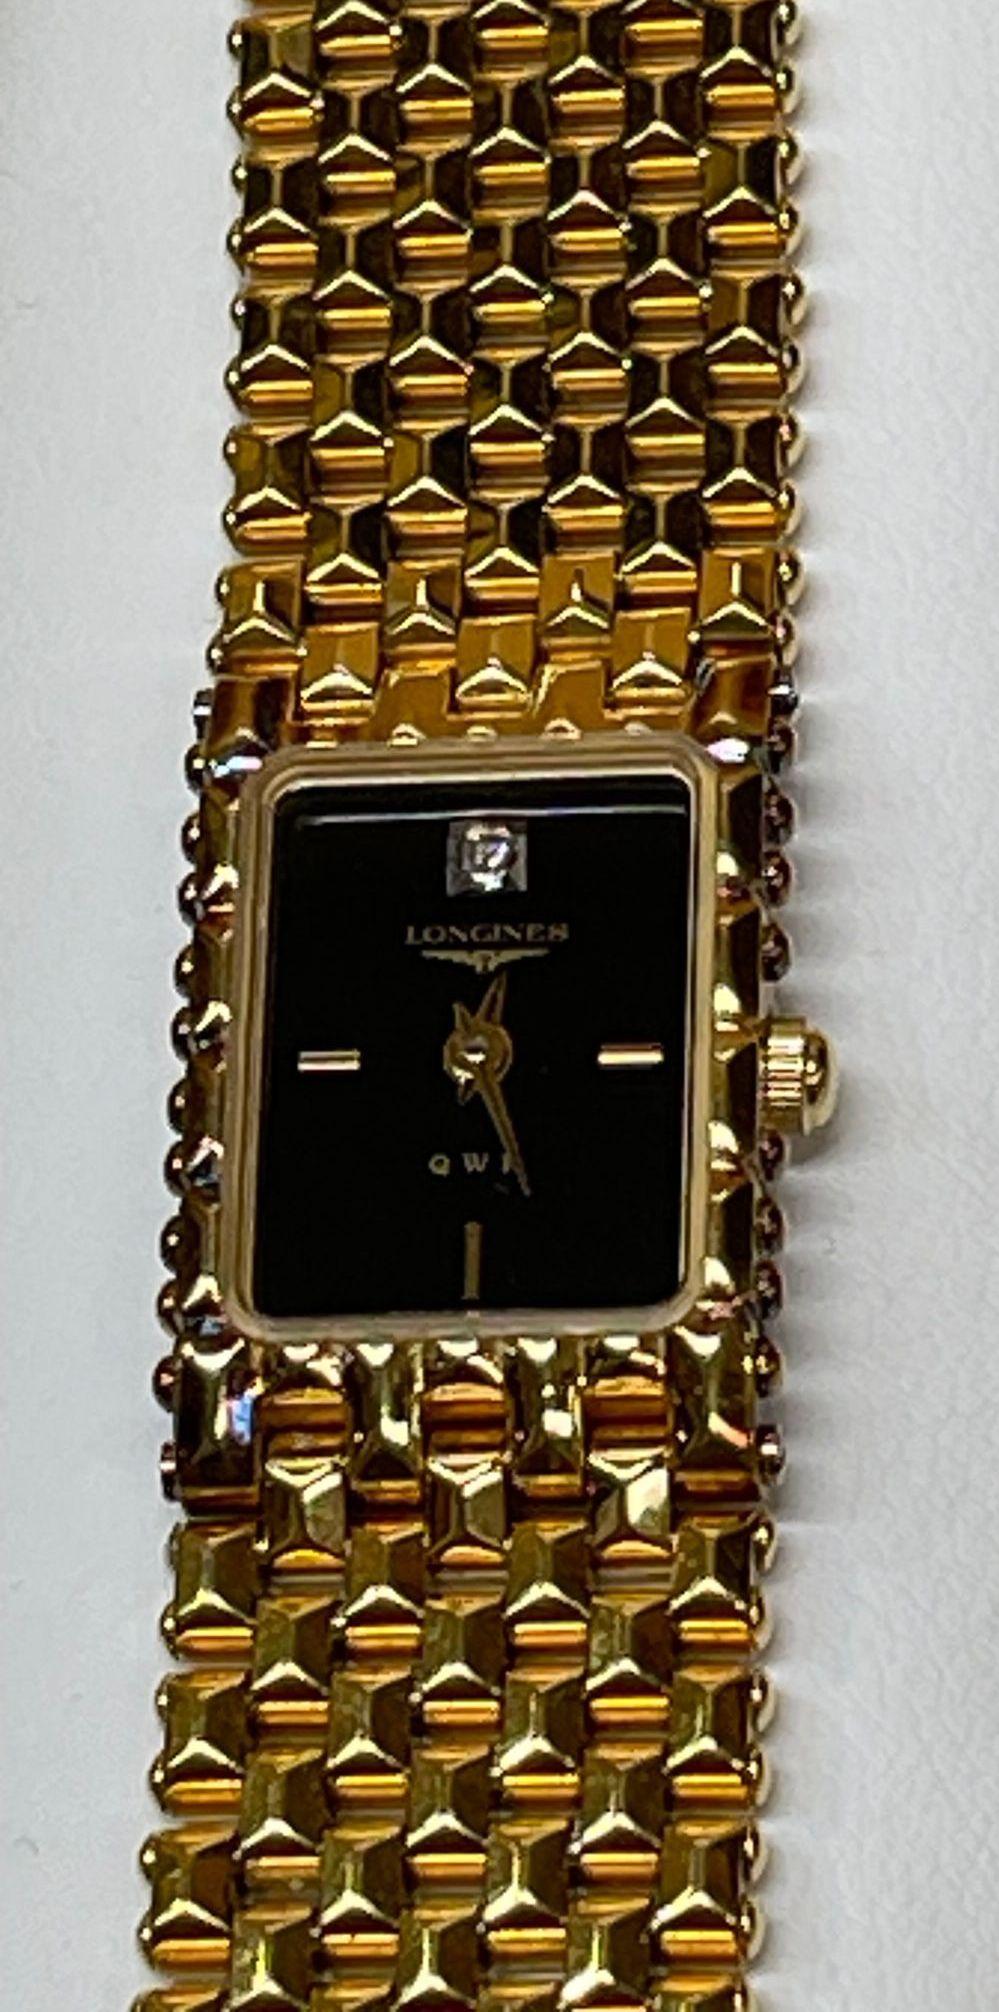 Vintage Longines QWR 030 Gold Filled Lady’s Link Bracelet Wristwatch. Black Face; Gold tone hands and hour markers. Stainless Steel back. Measuring approx. 6.75” Long. Link chain bracelet with Longines Logo on clasp closure. Deployment Buckle. New